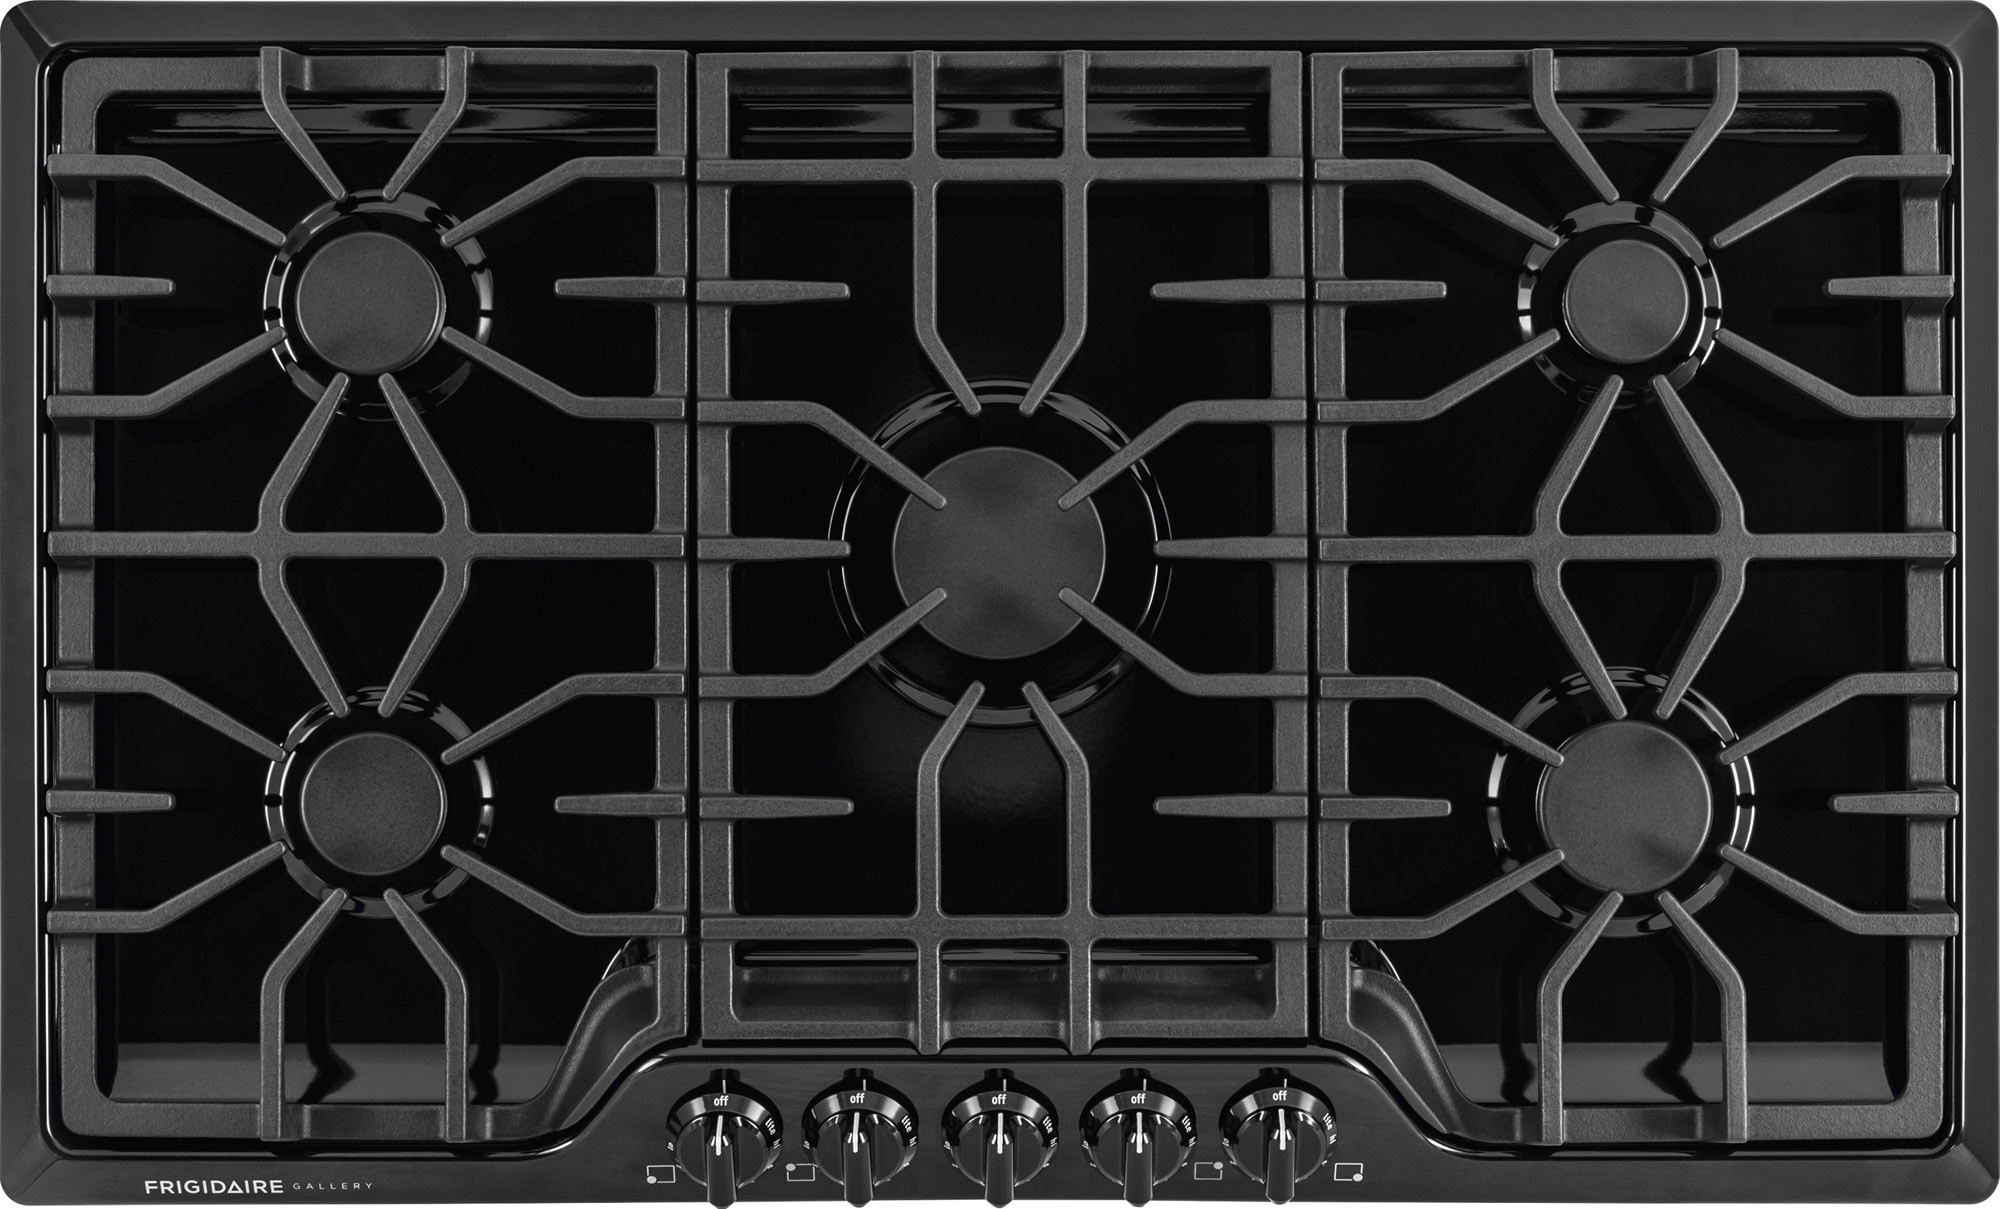 Frigidaire FGGC3645QS Frigidaire Gallery 36 inch Gas Cooktop in Stainless Steel 